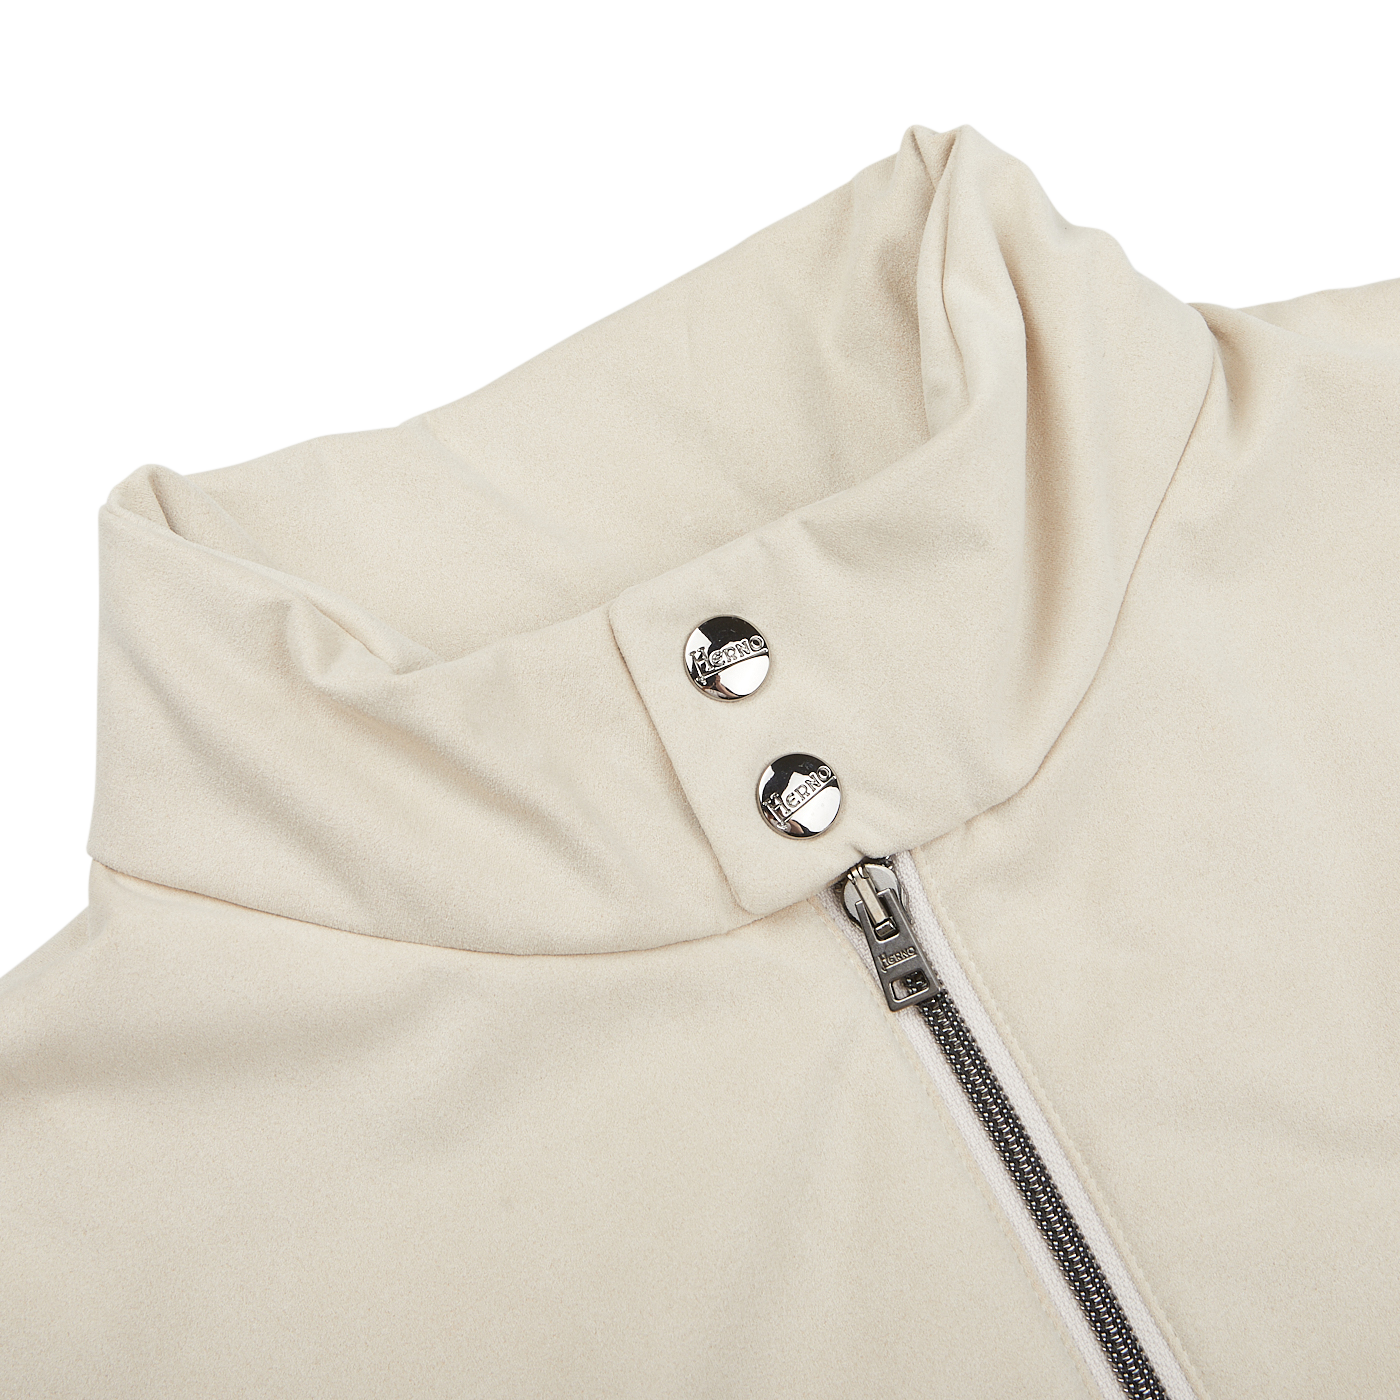 Close-up of a Herno Light Beige Suede Alcantara Zip Gilet with a high collar, crafted in luxurious Alcantara fabric, featuring a front zipper and two metallic snap buttons at the top.